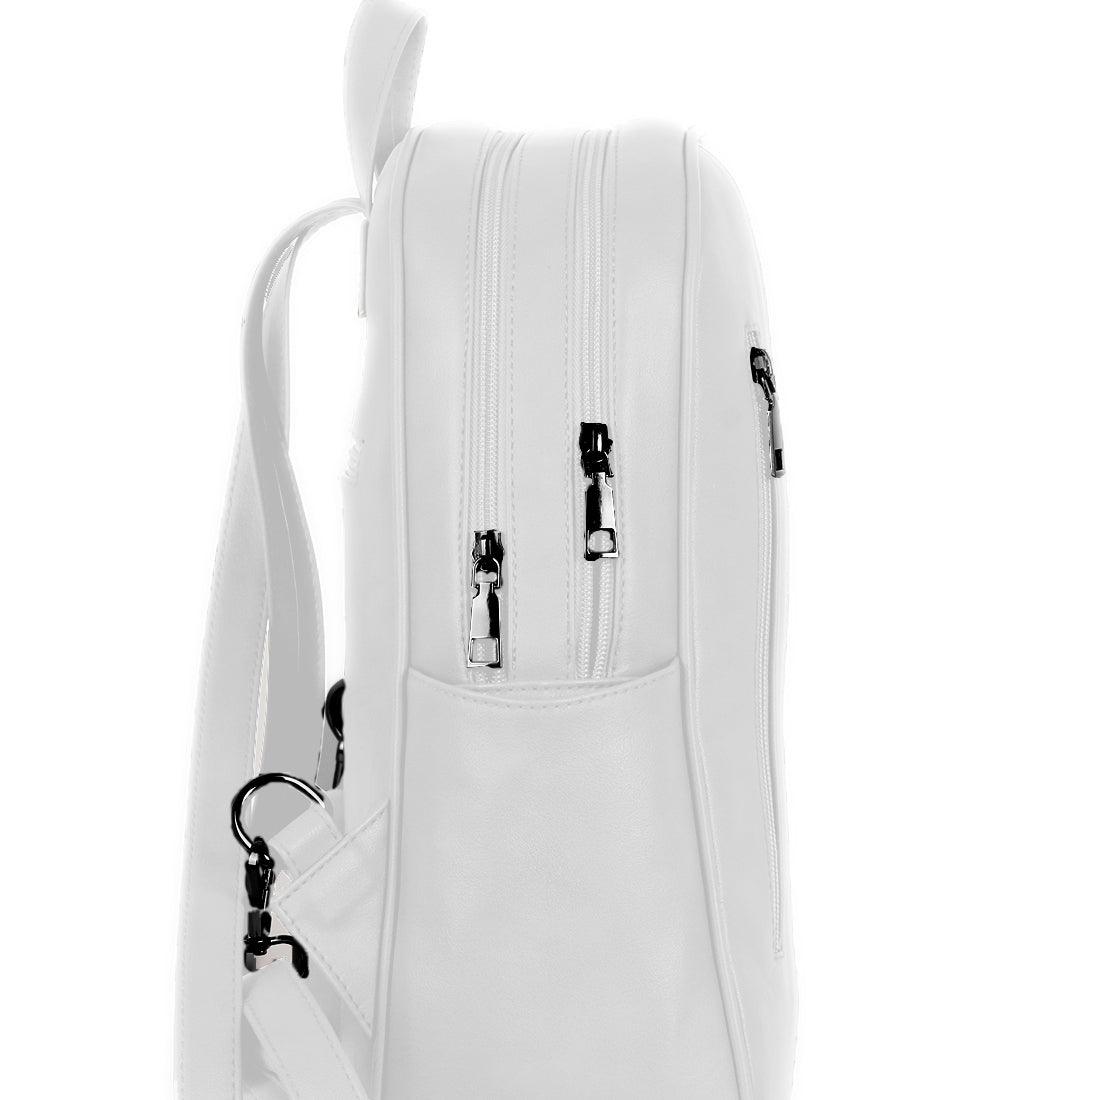 White Mixed Backpack Kitty - CANVAEGYPT